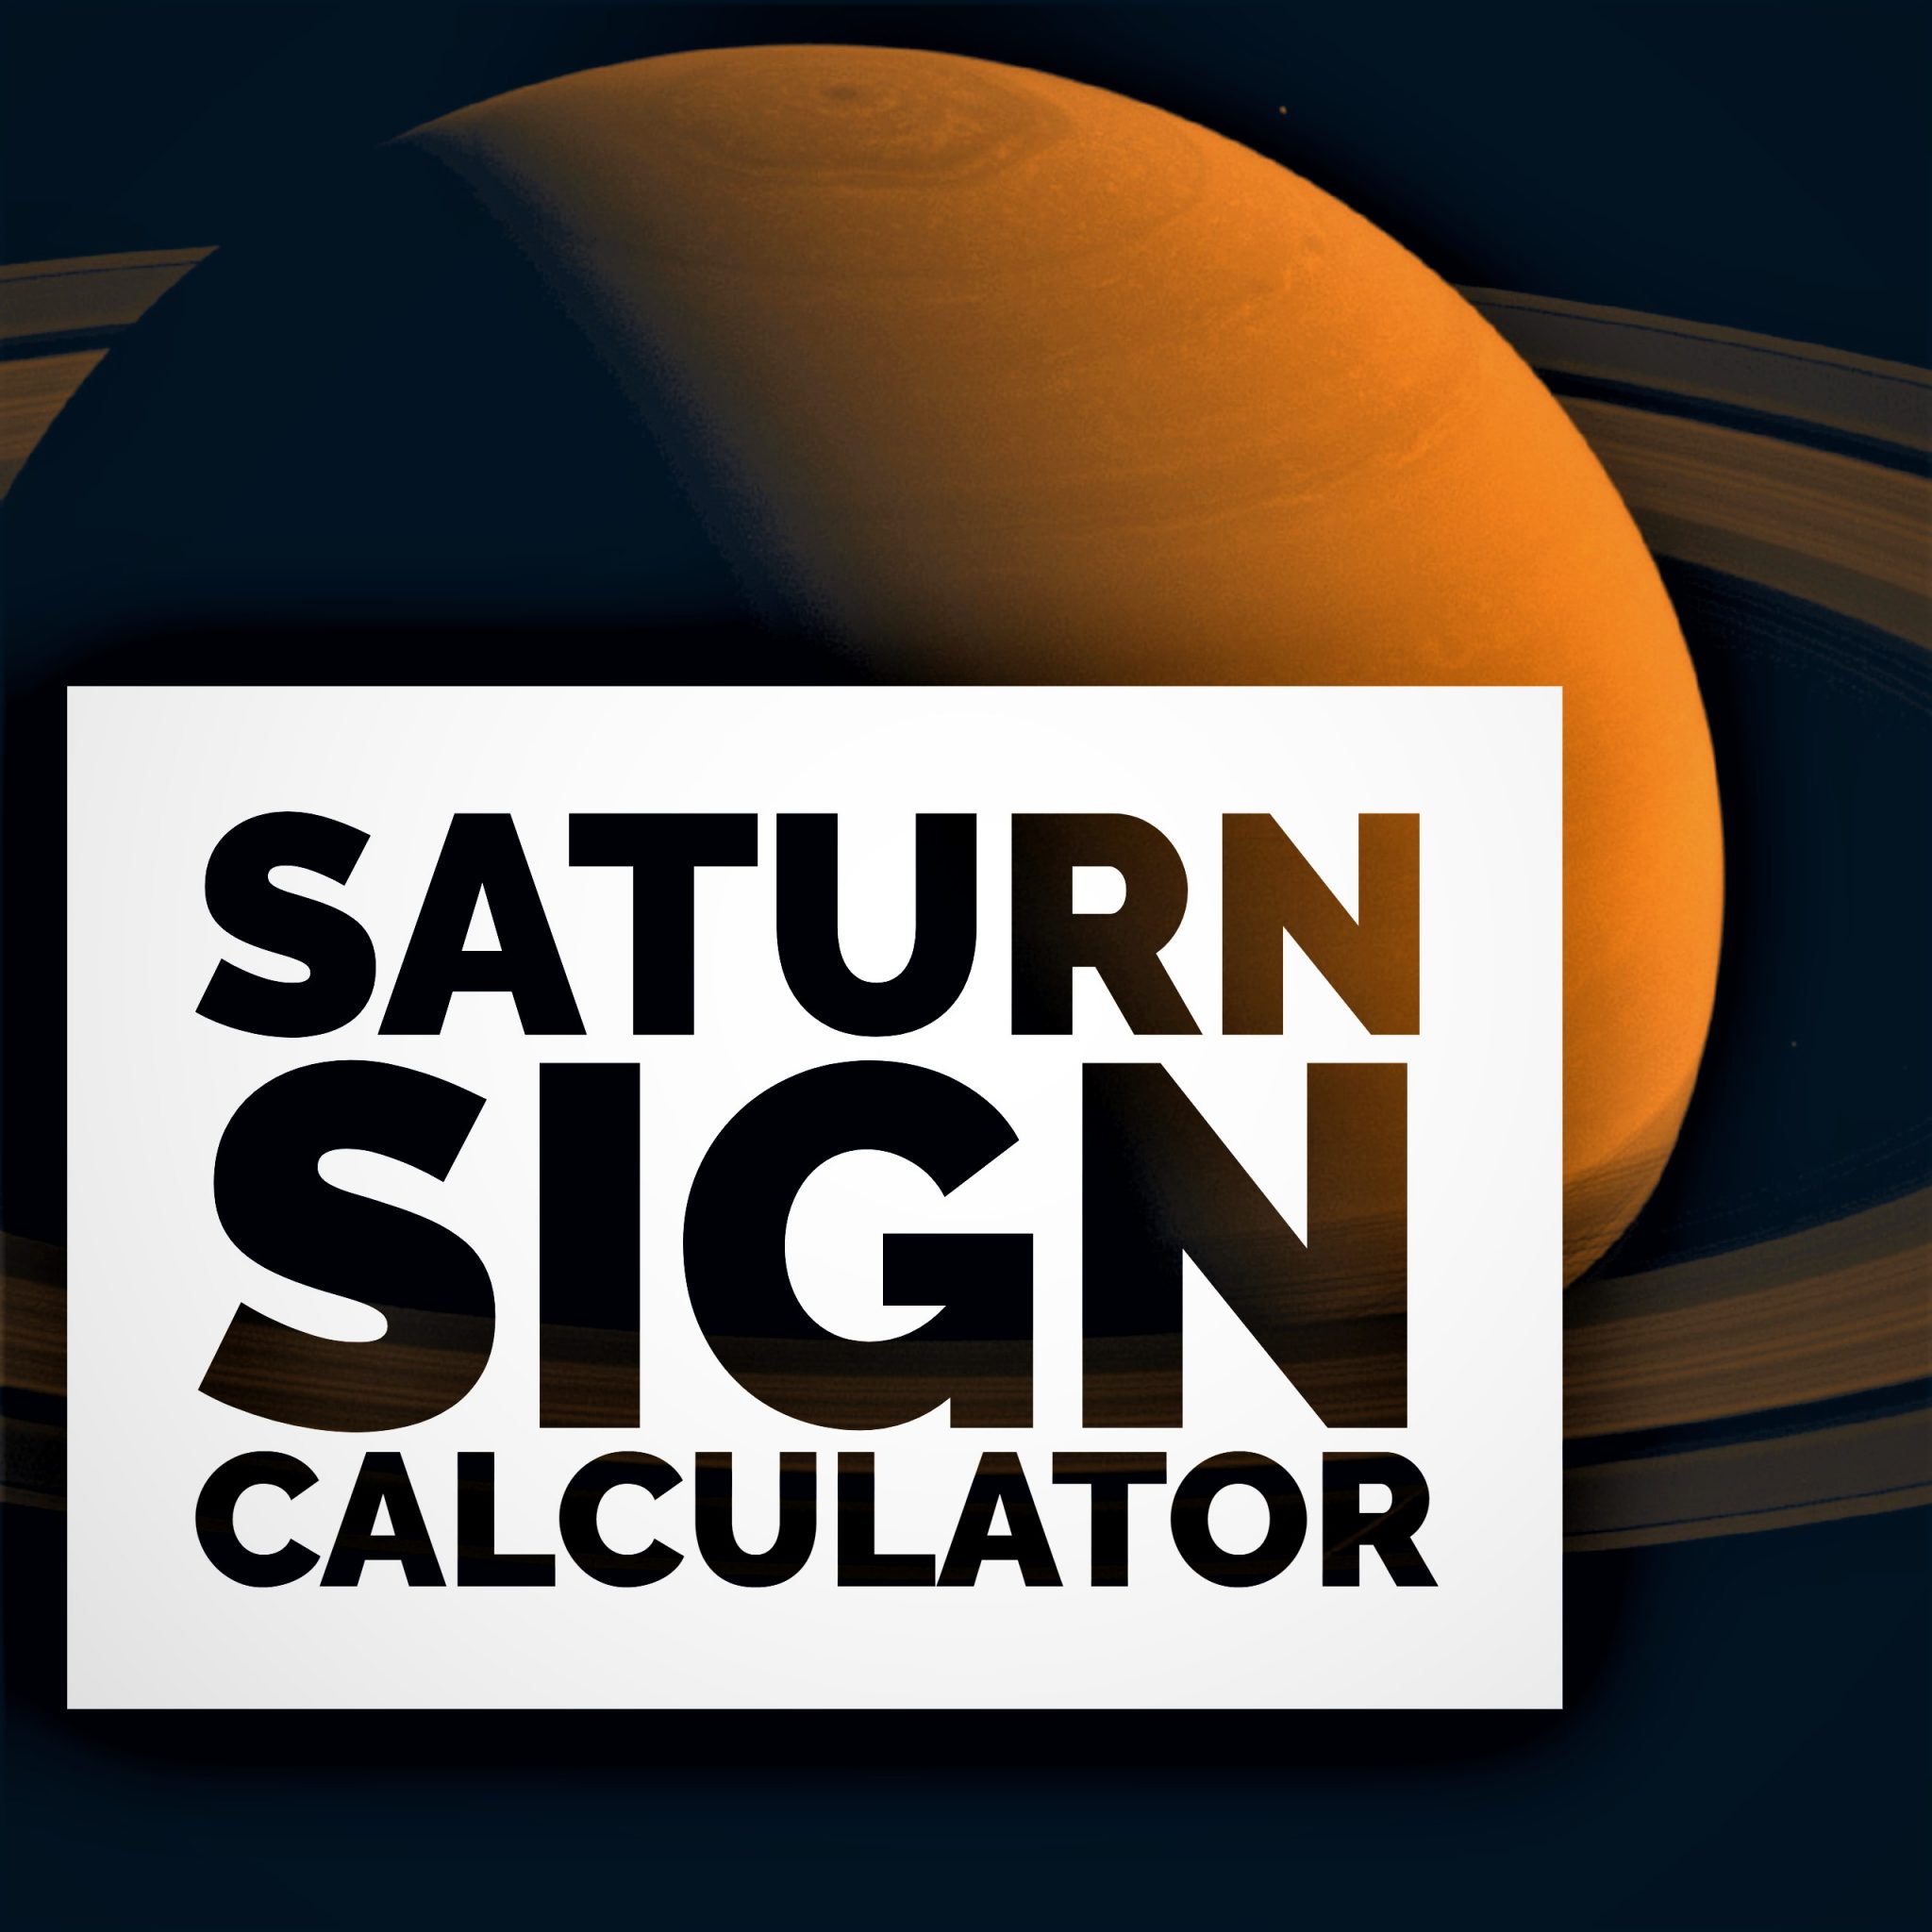 Saturn Sign Calculator - Know Your Sign Compatibility with Saturn